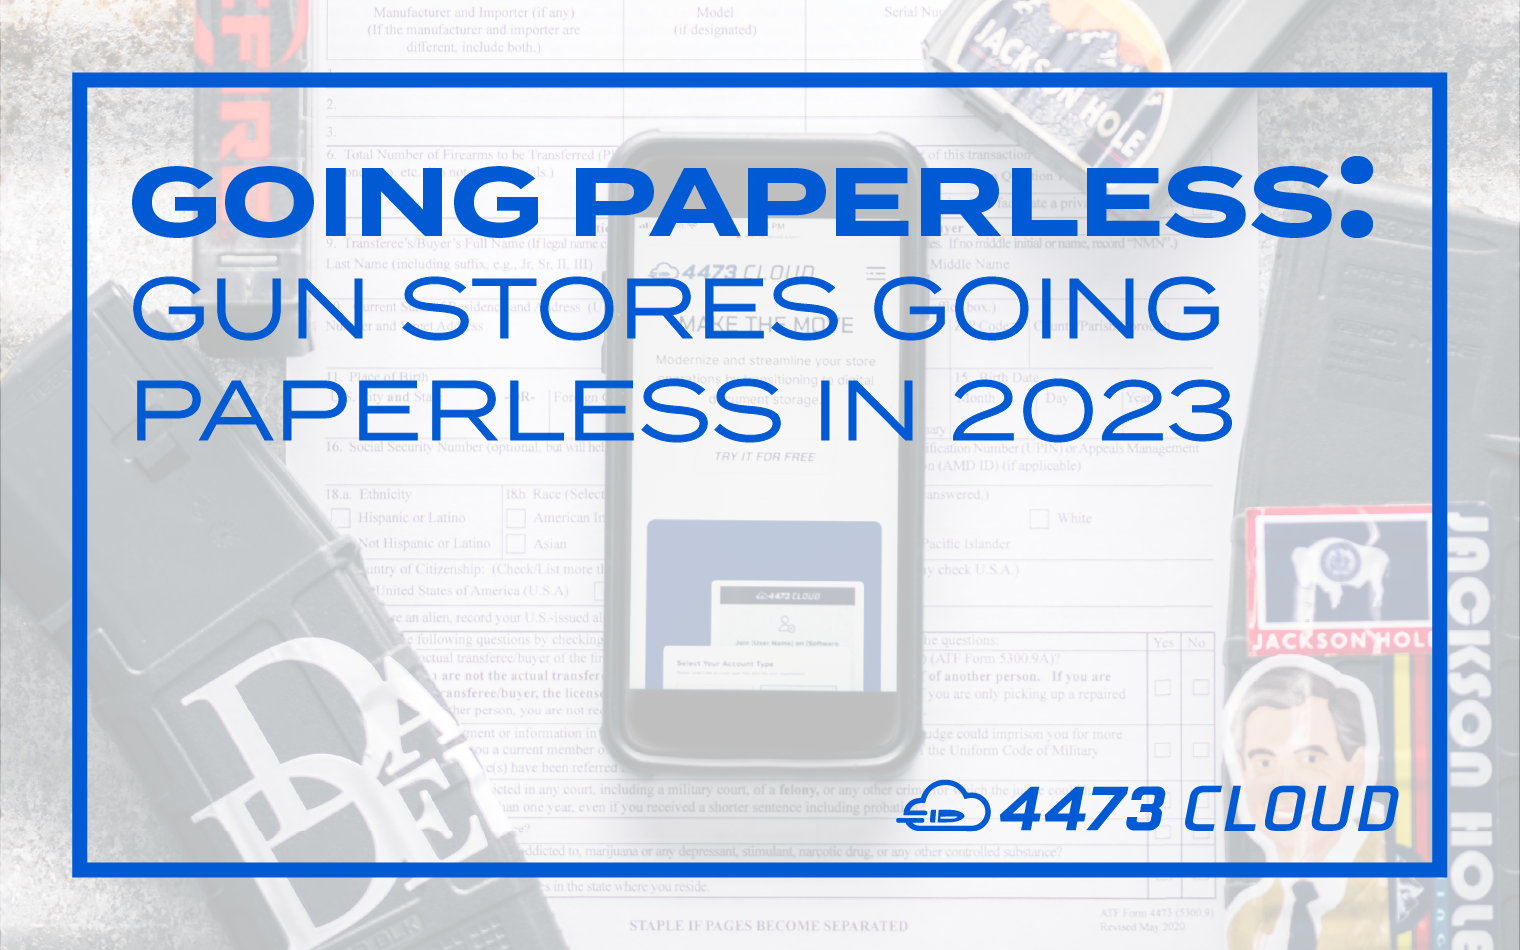 4473 cloud going paperless in 2023 for gun stores